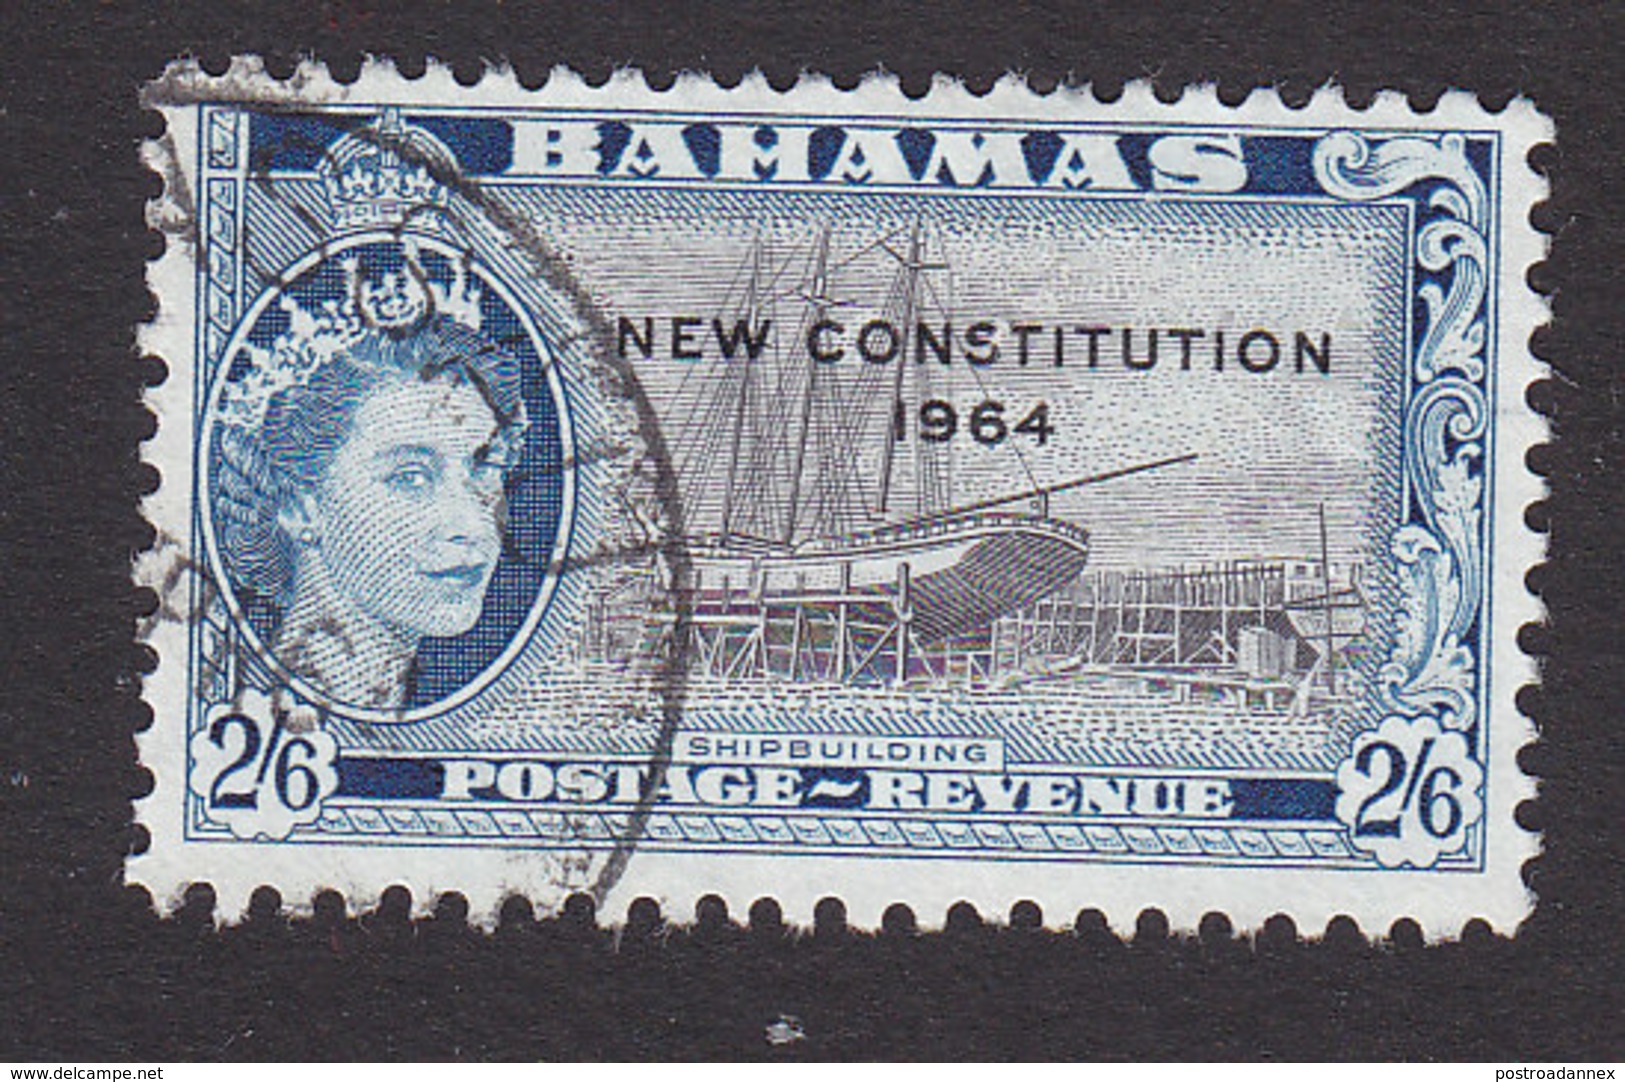 Bahama, Scott #197, Used, Industry Of Bahama Overprinted, Issued 1964 - 1963-1973 Ministerial Government